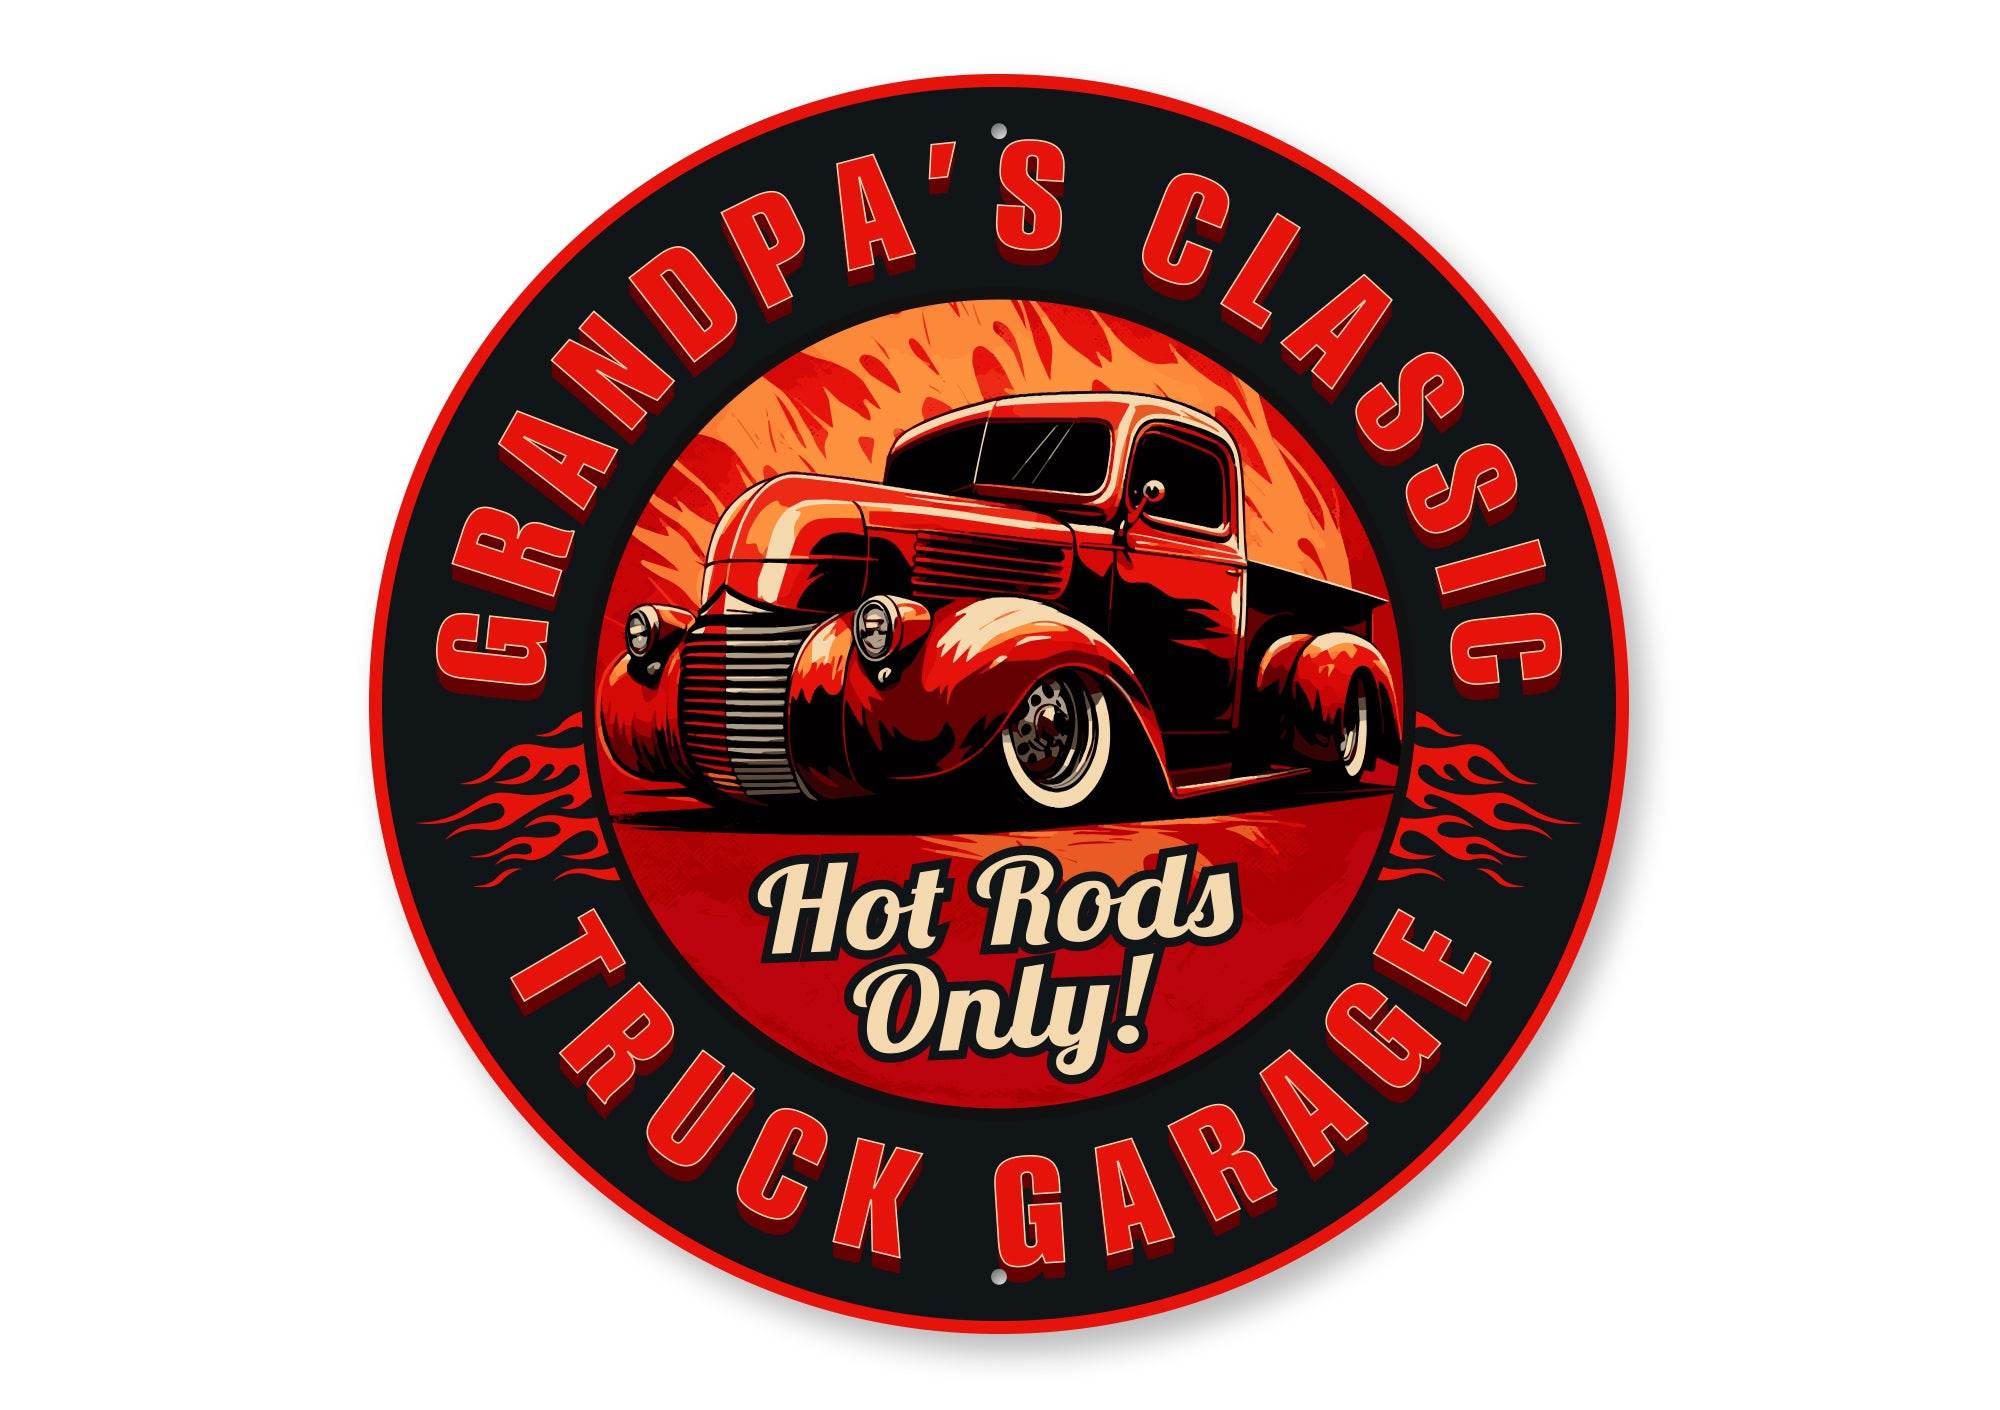 Grandpas Classic Truck Garage Hot Rods Only Sign